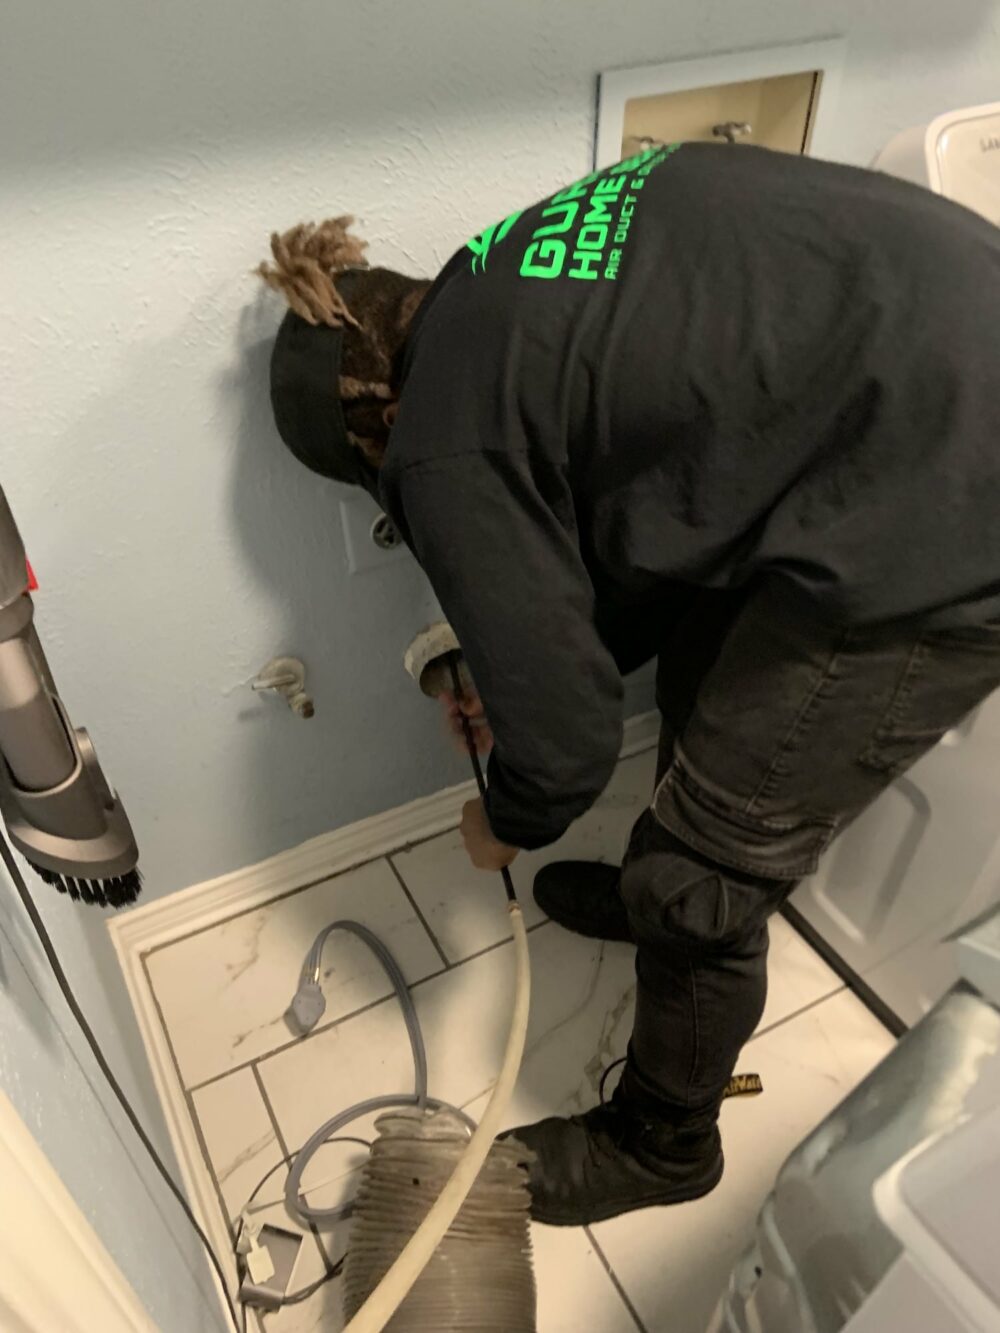 Dryer vent duct cleaning